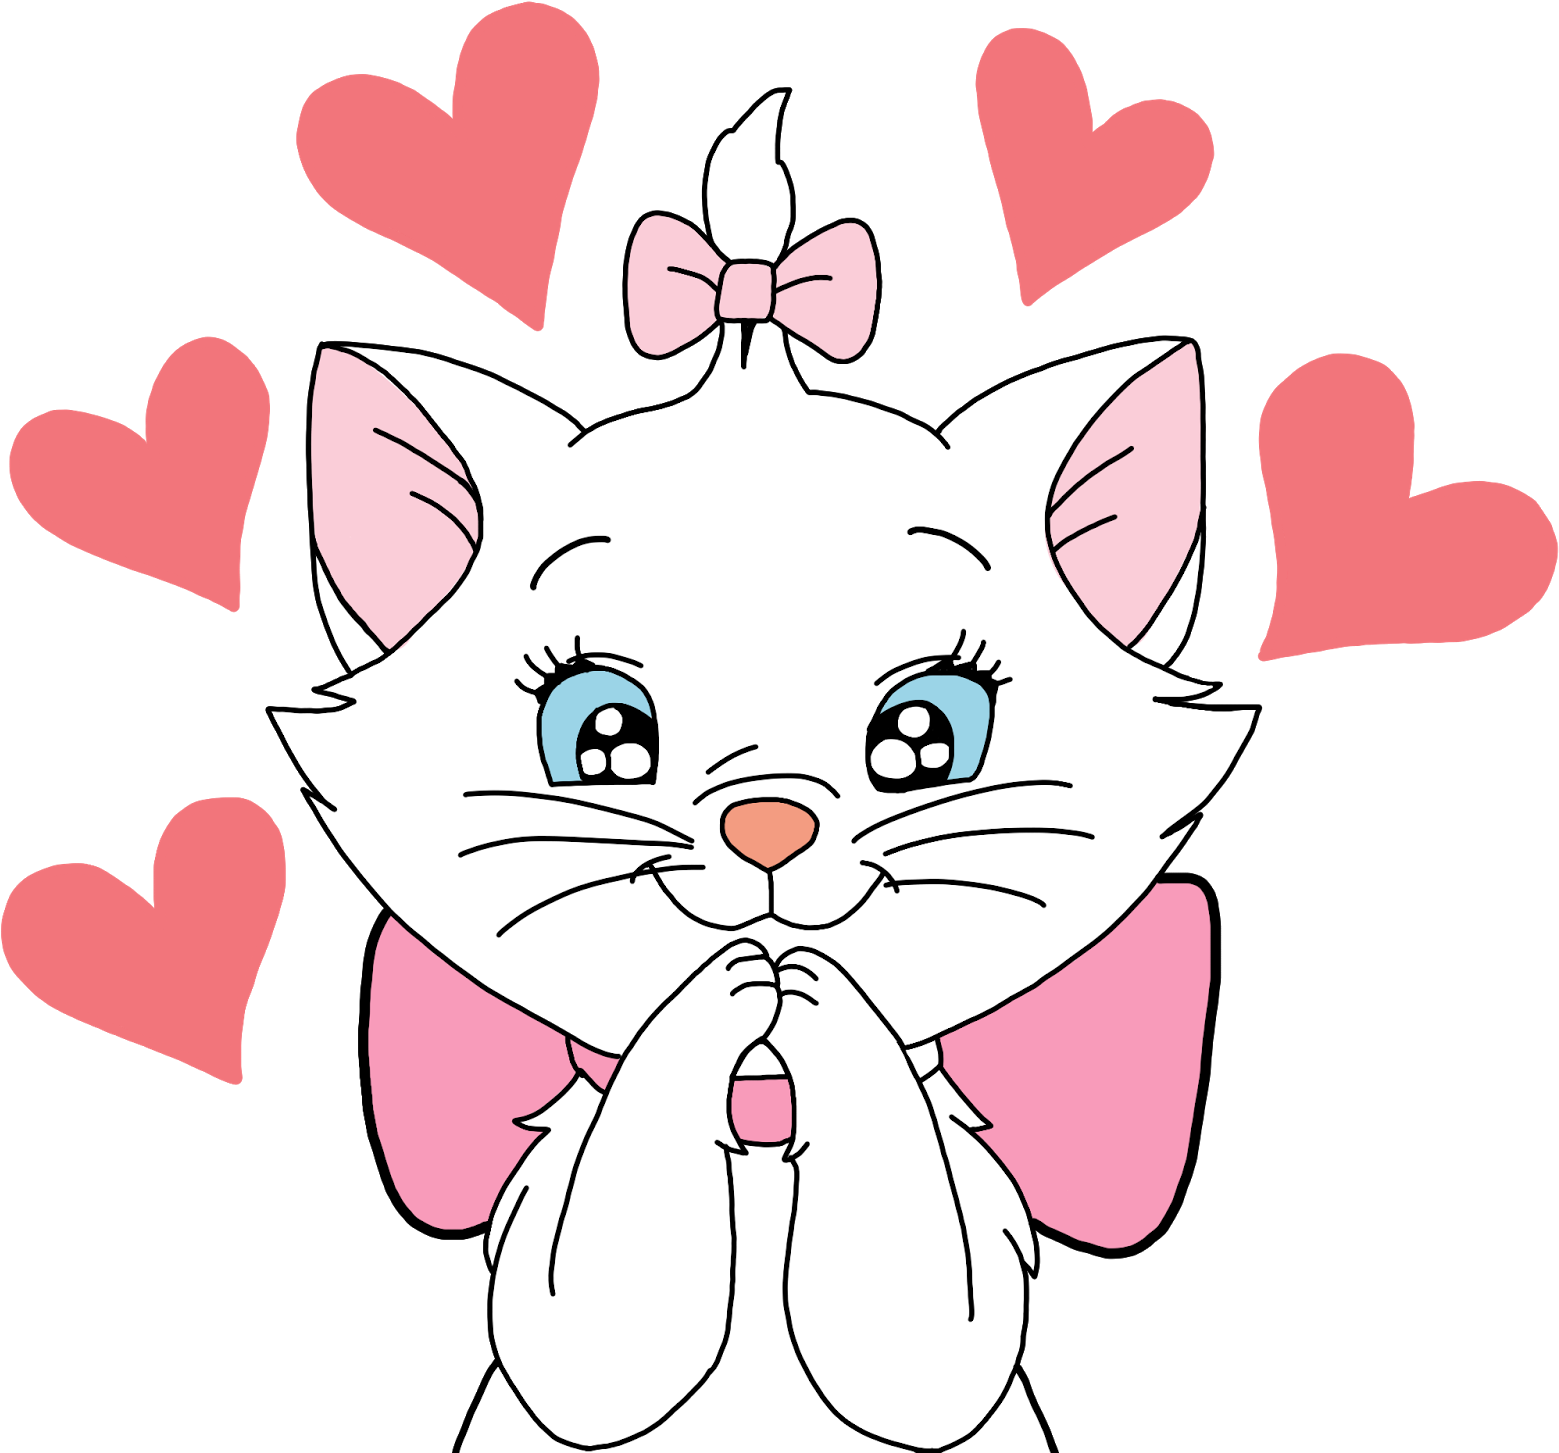 A Cartoon Of A Cat With Hearts Around It